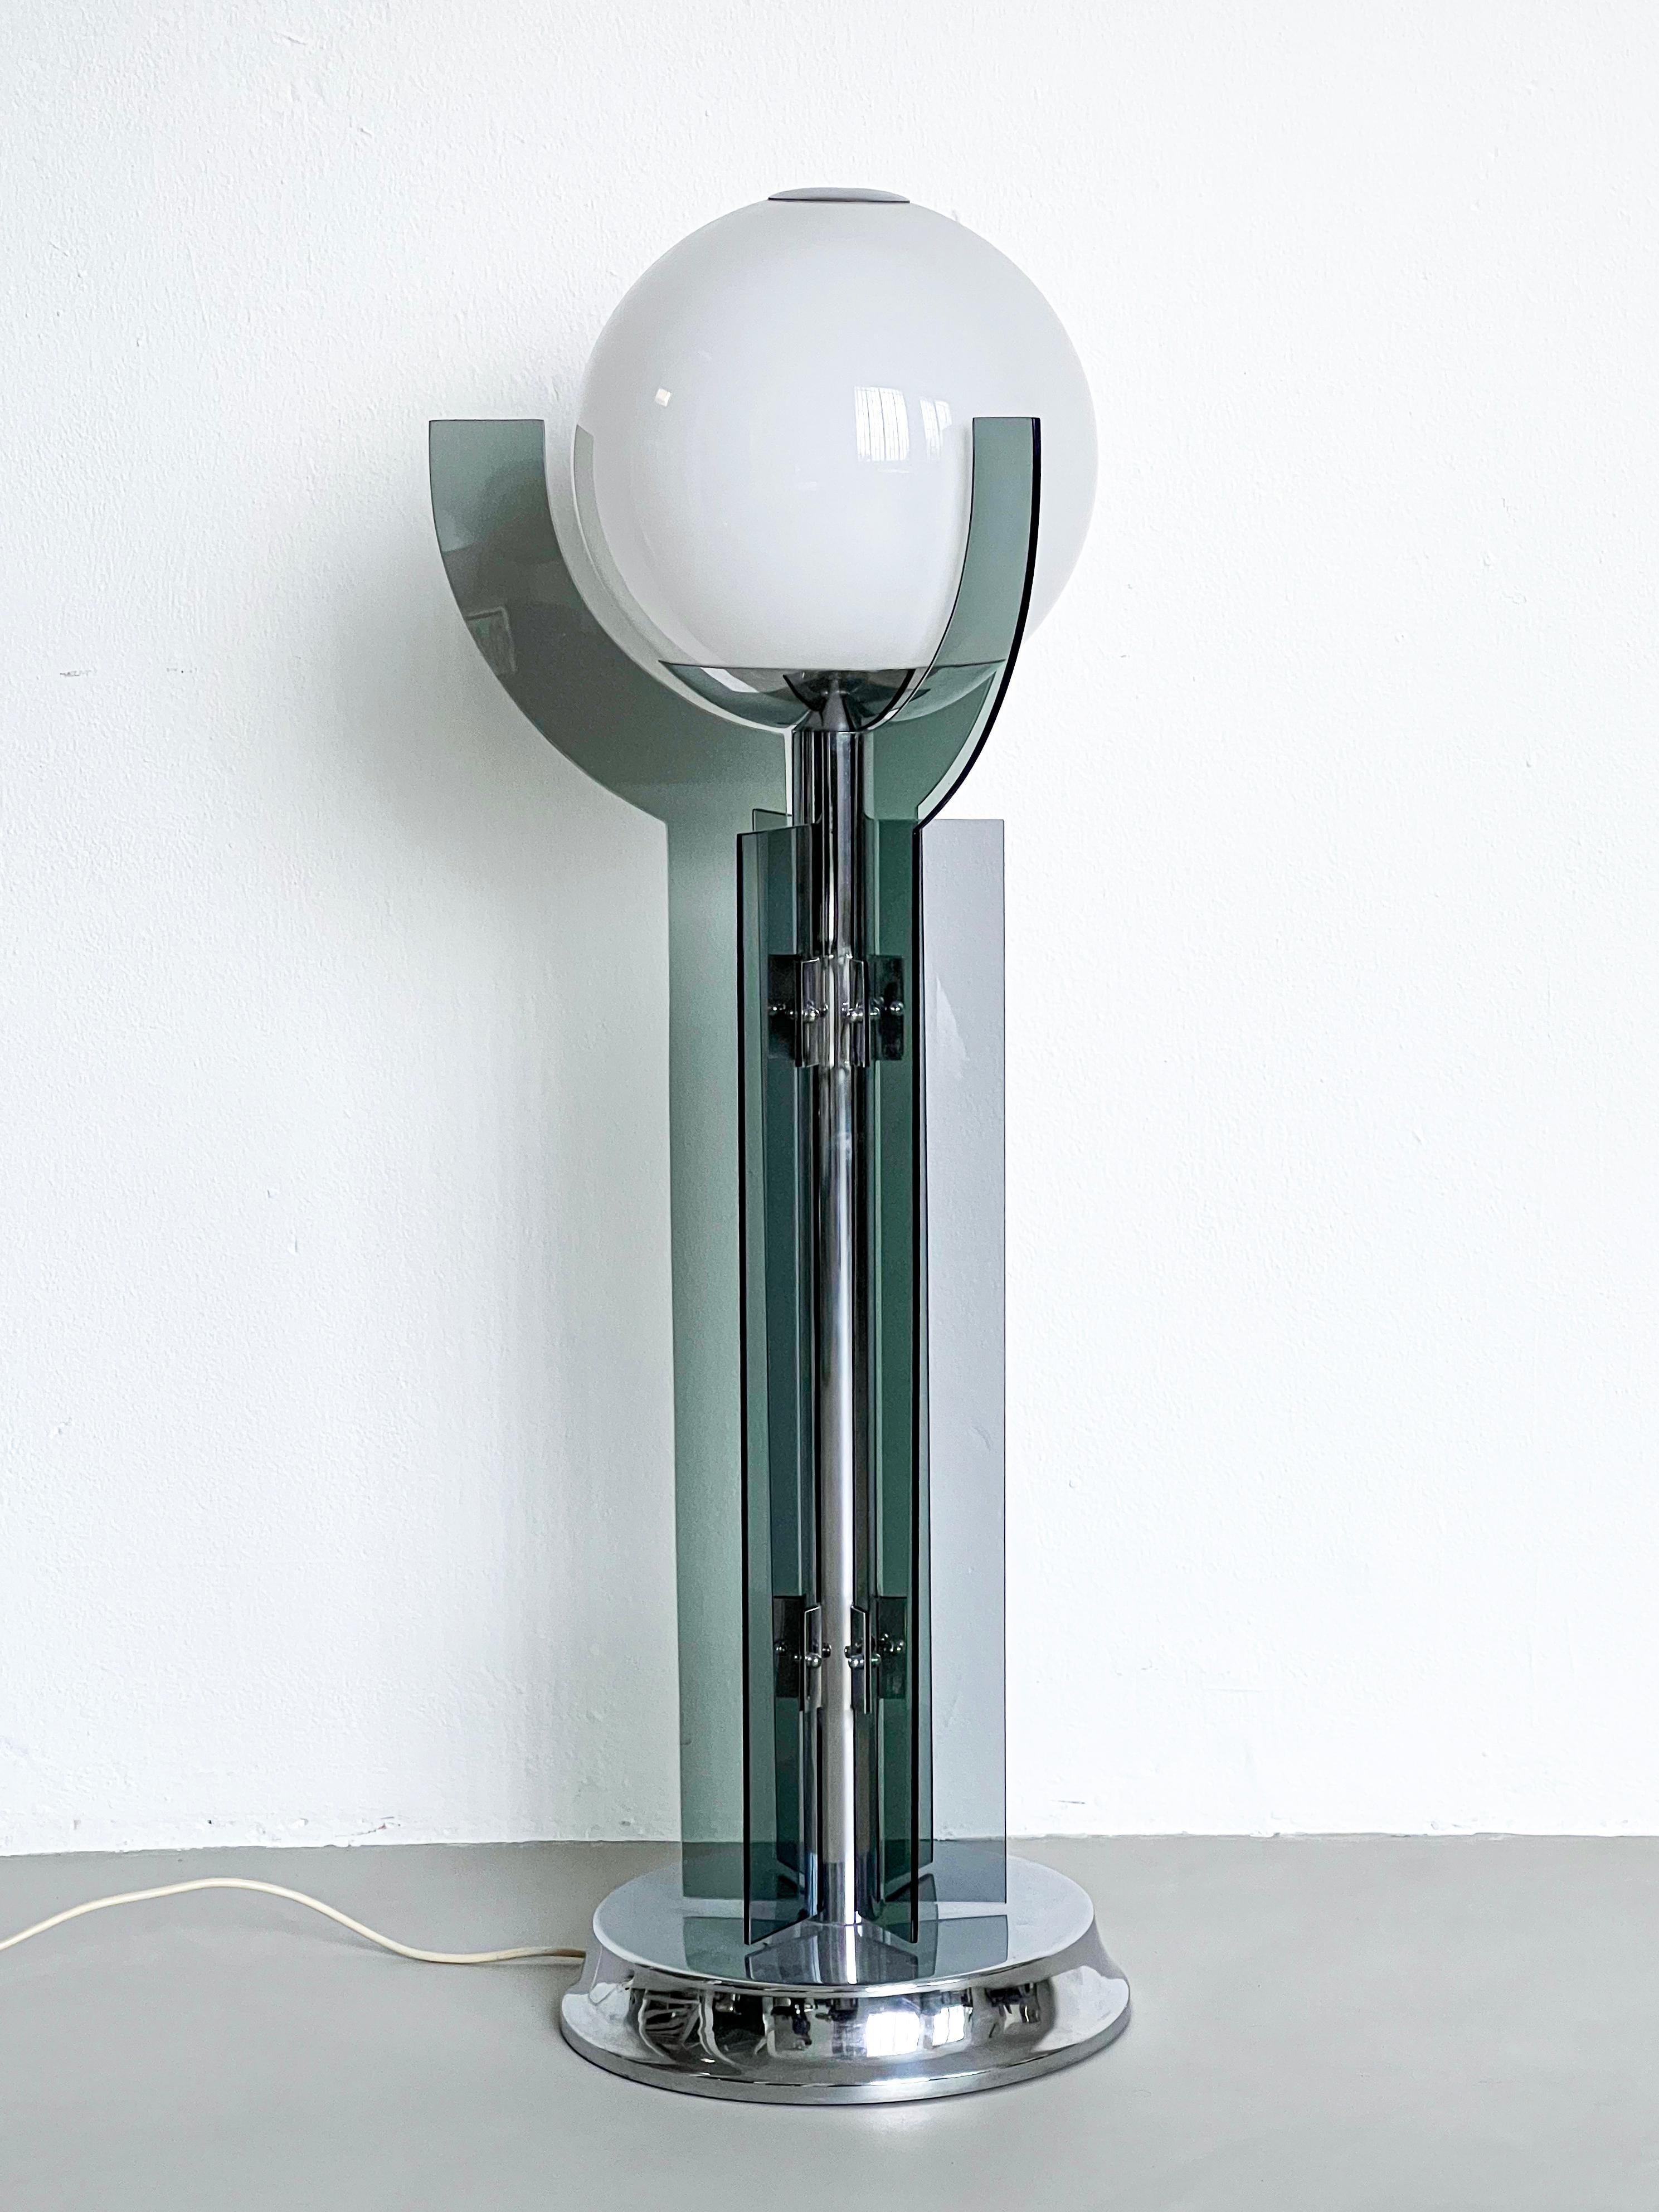 Decorative floor lamp - sculptural glass lamp - collectible space age lamp - Lighting 

Unusual and attractive 1980s floor lamp in chromed metal and glass, with one big opaline globe - lampshade and three decorative blades in smoked glass, mounted